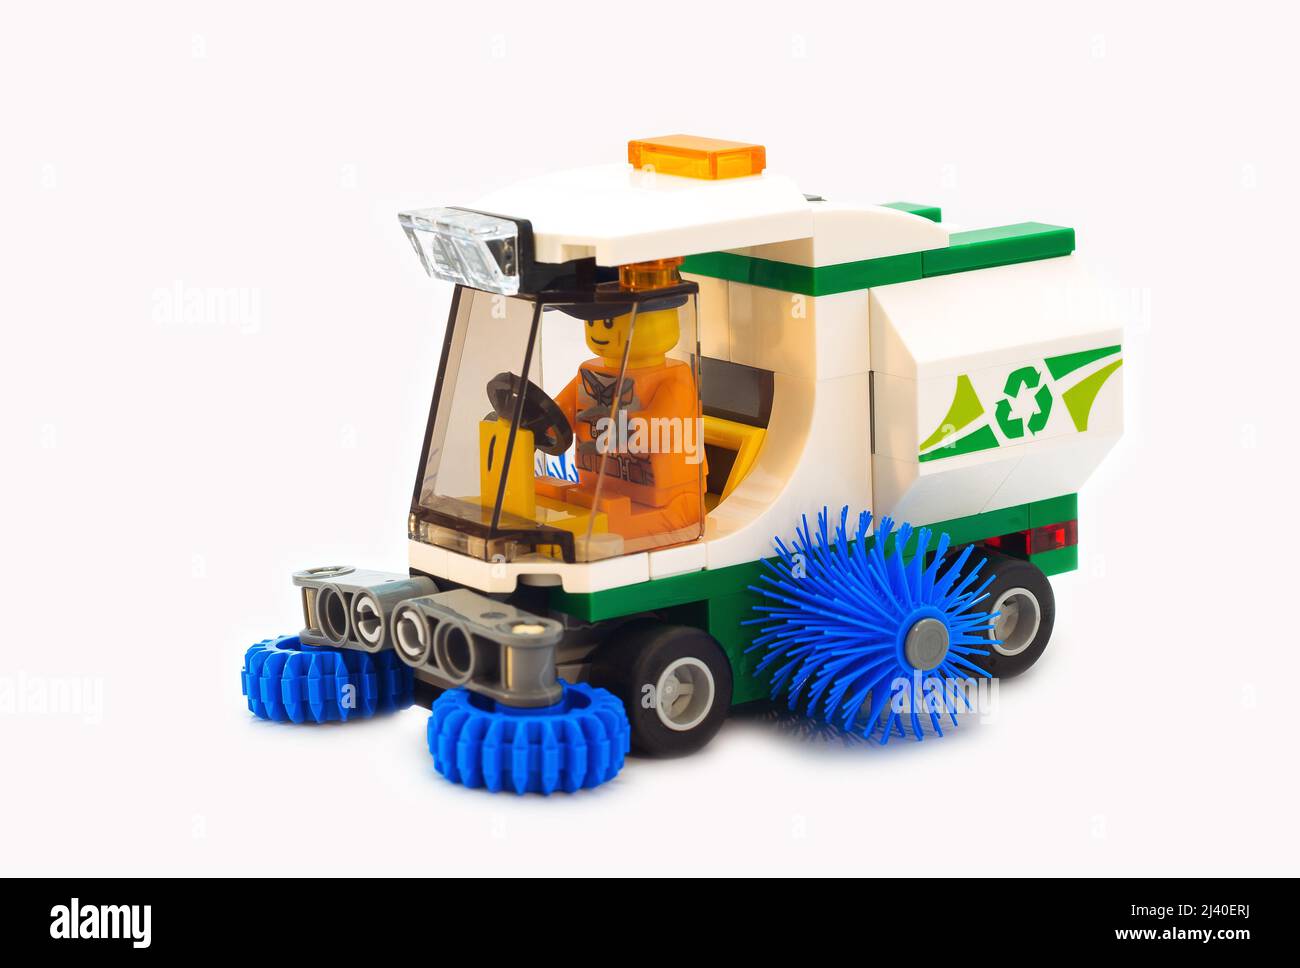 Street sweeper vehicle Cut Out Stock Images & Pictures - Alamy